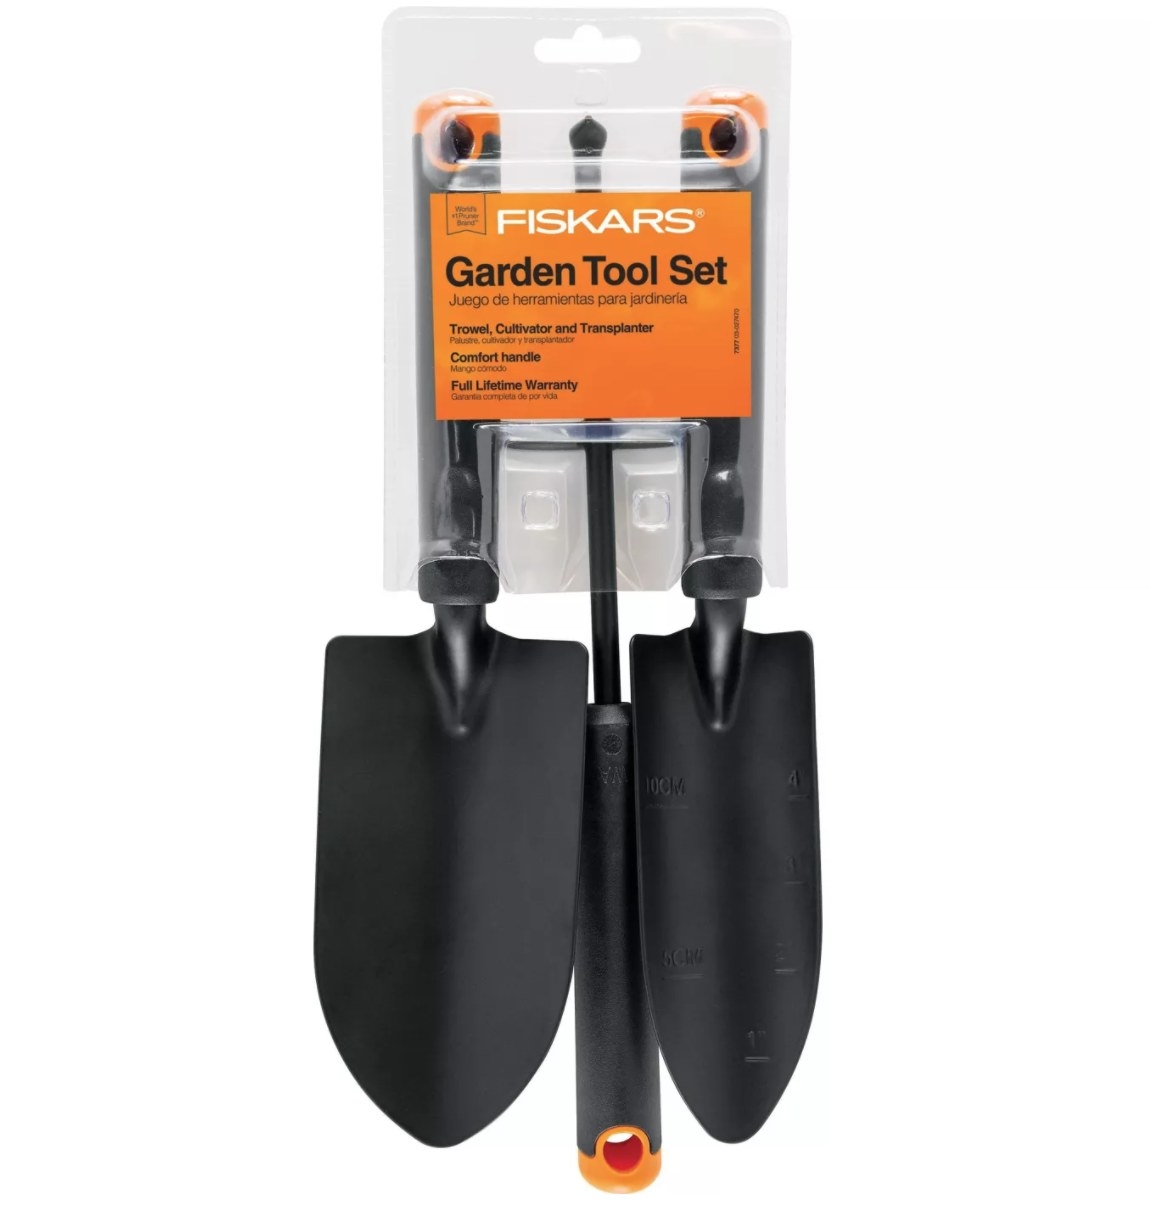 A black trowel, cultivator, and transplanter with an orange knob